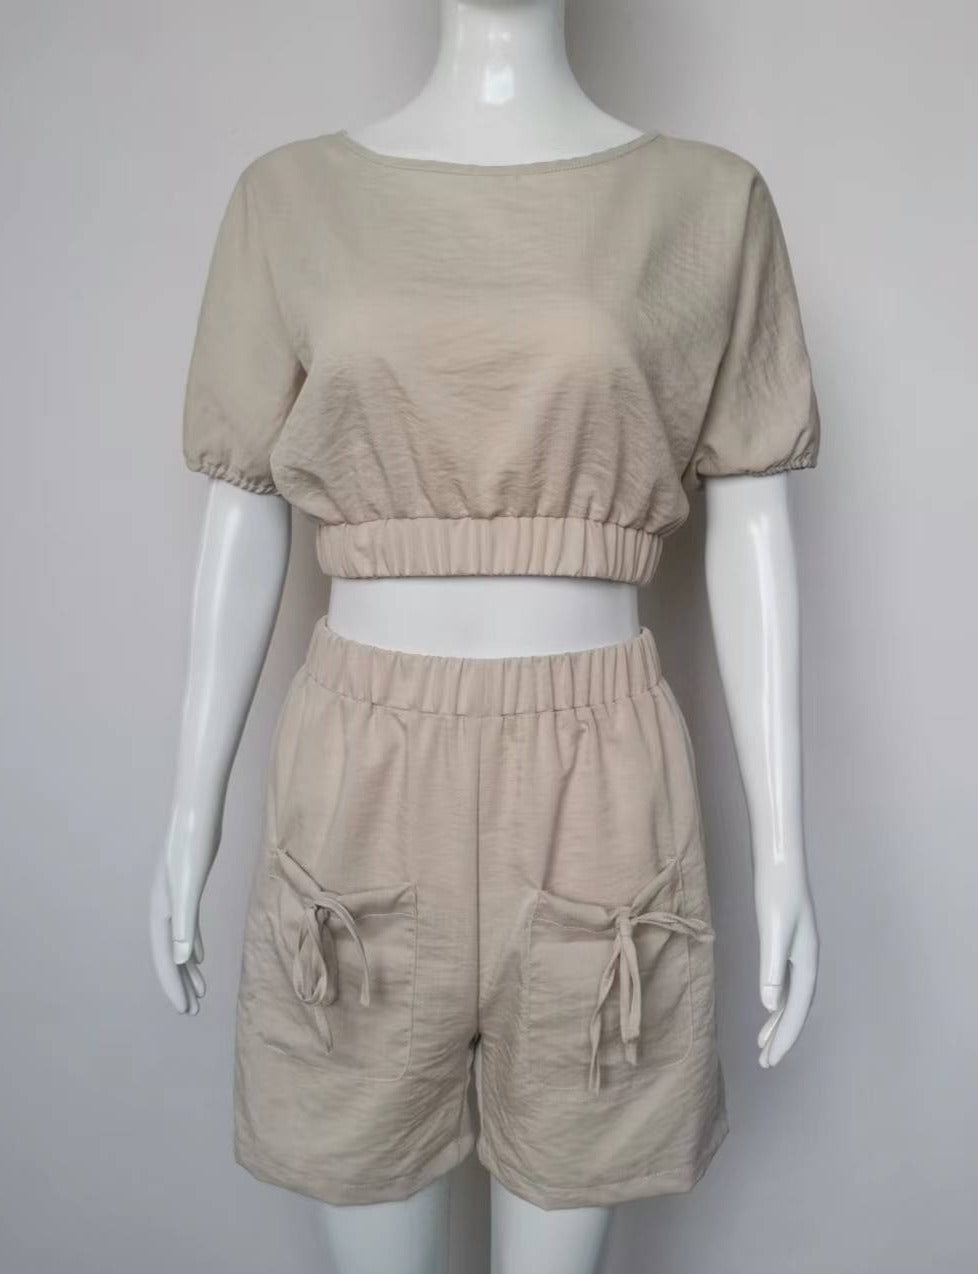 NTG Fad SUIT Cotton and linen halter top and shorts set